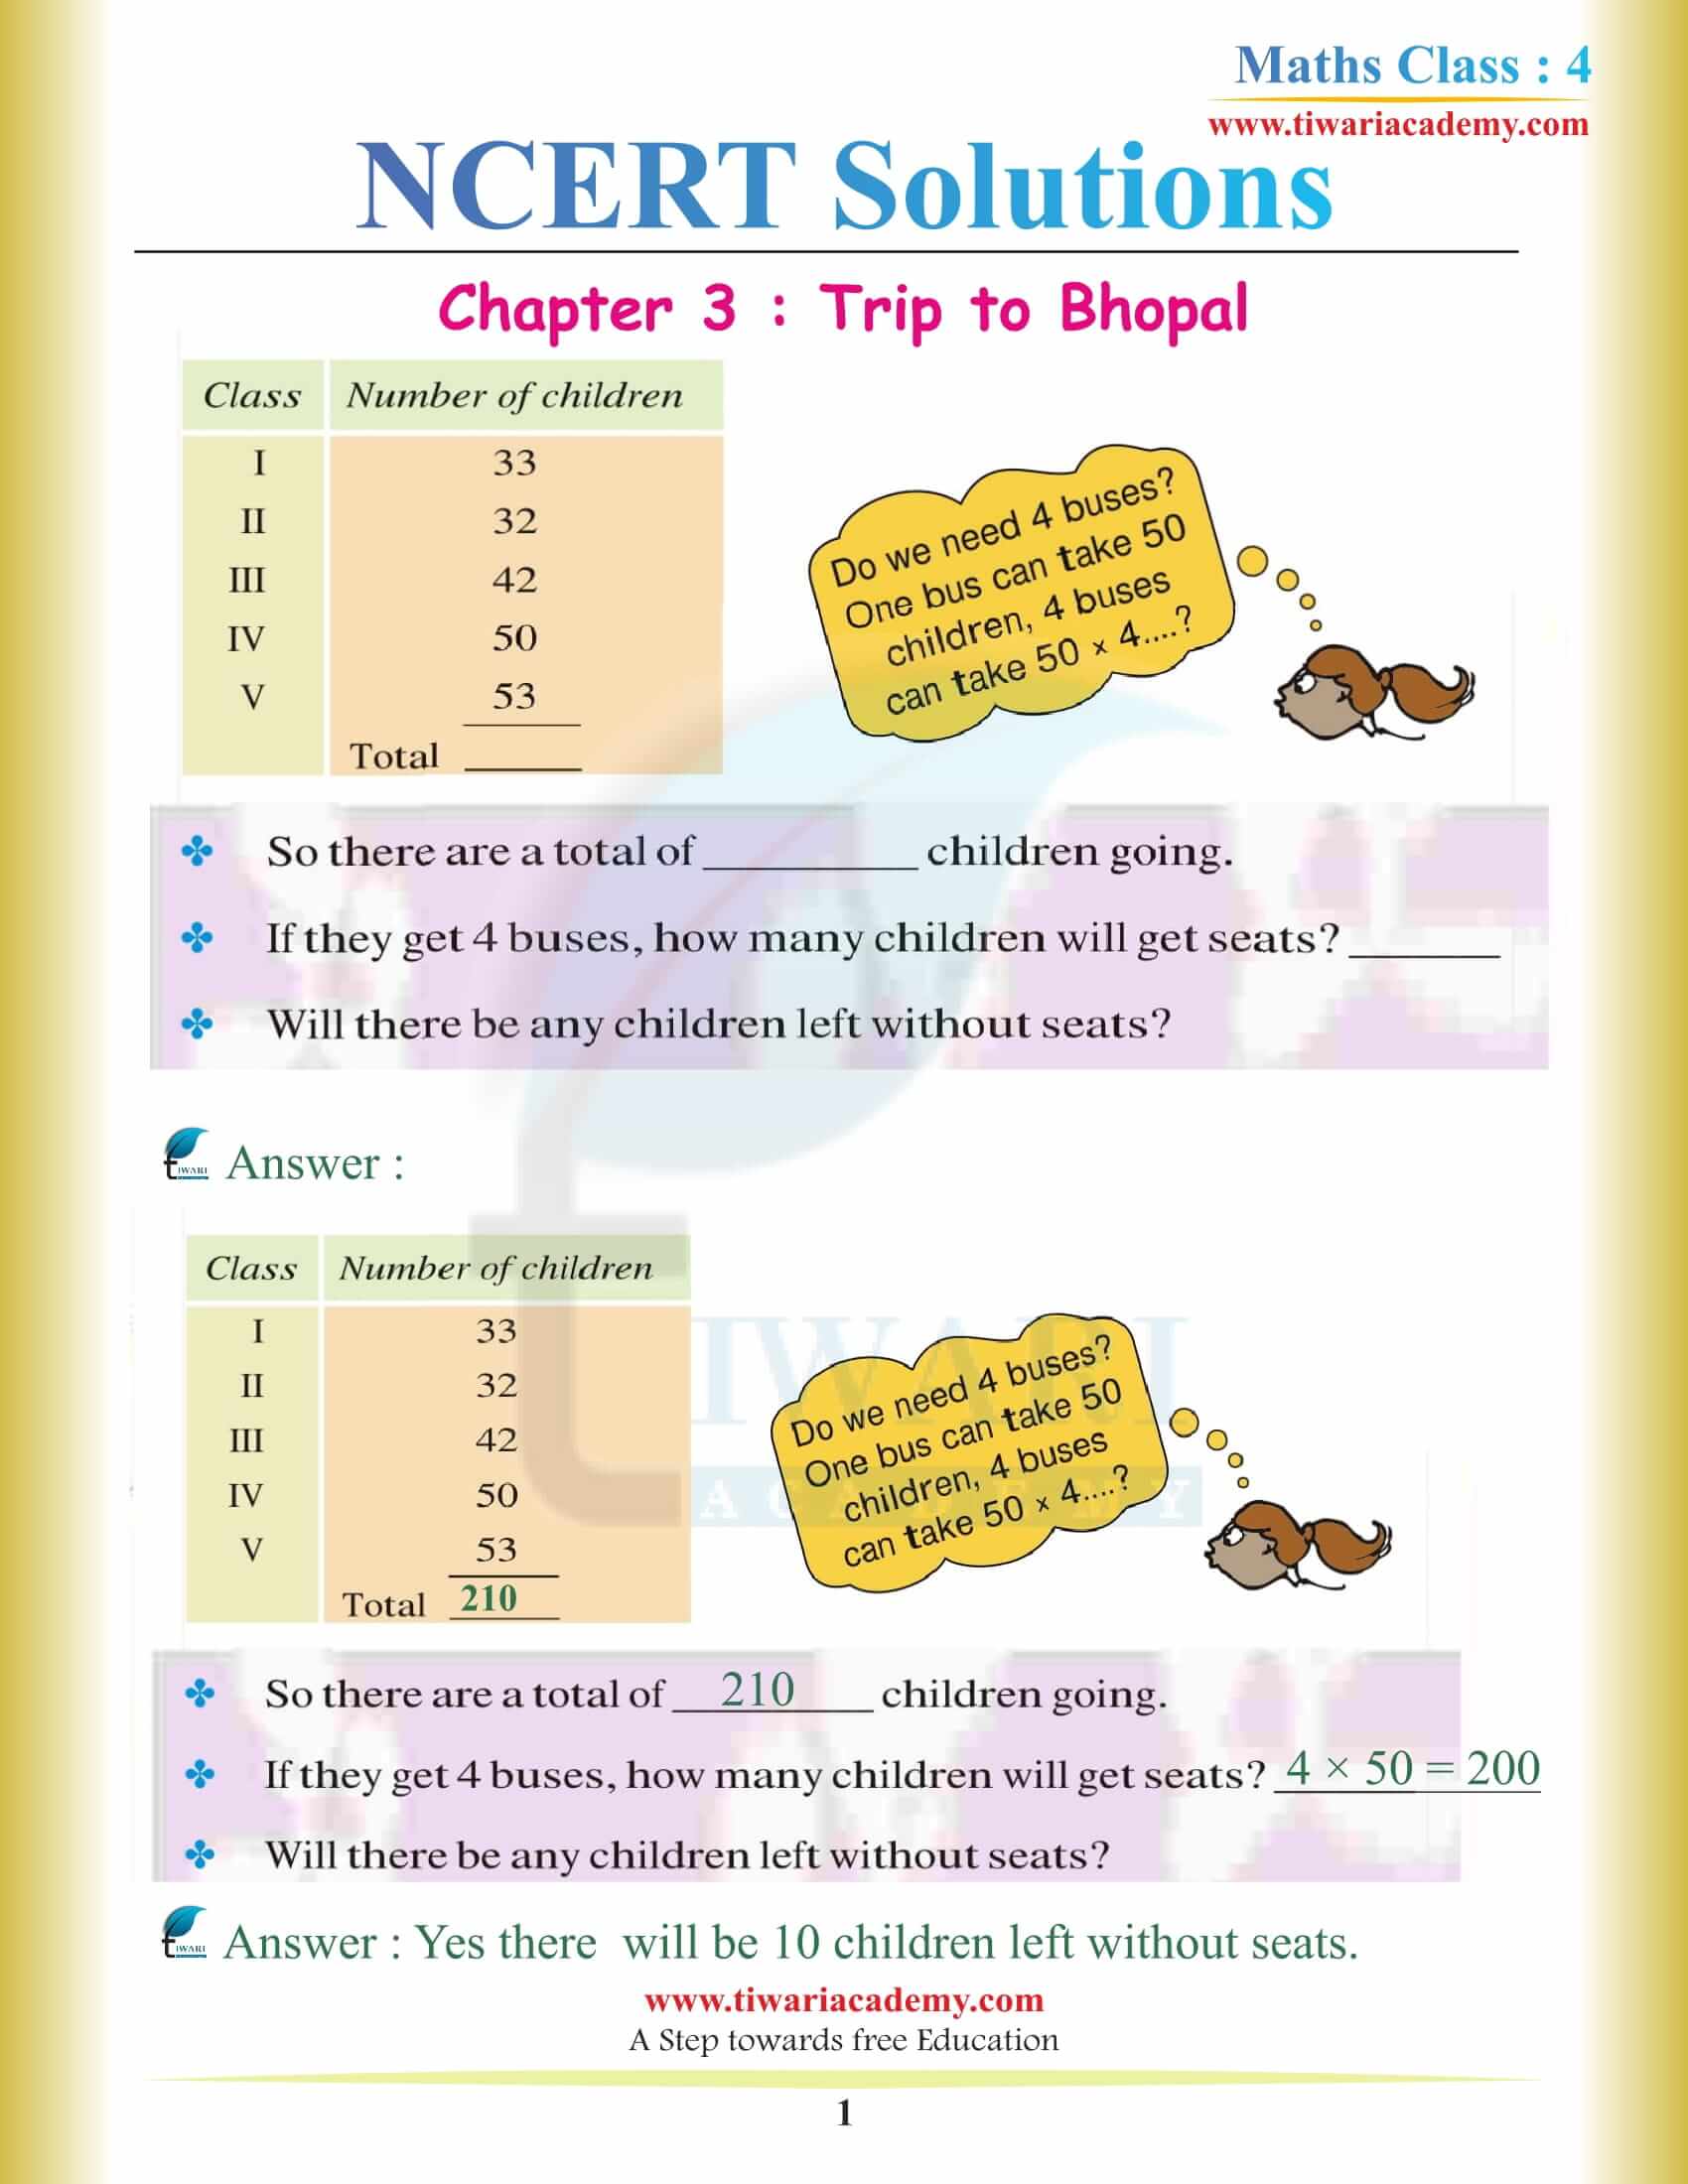 NCERT Solutions for Class 4 Maths Chapter 3 A Trip to Bhopal